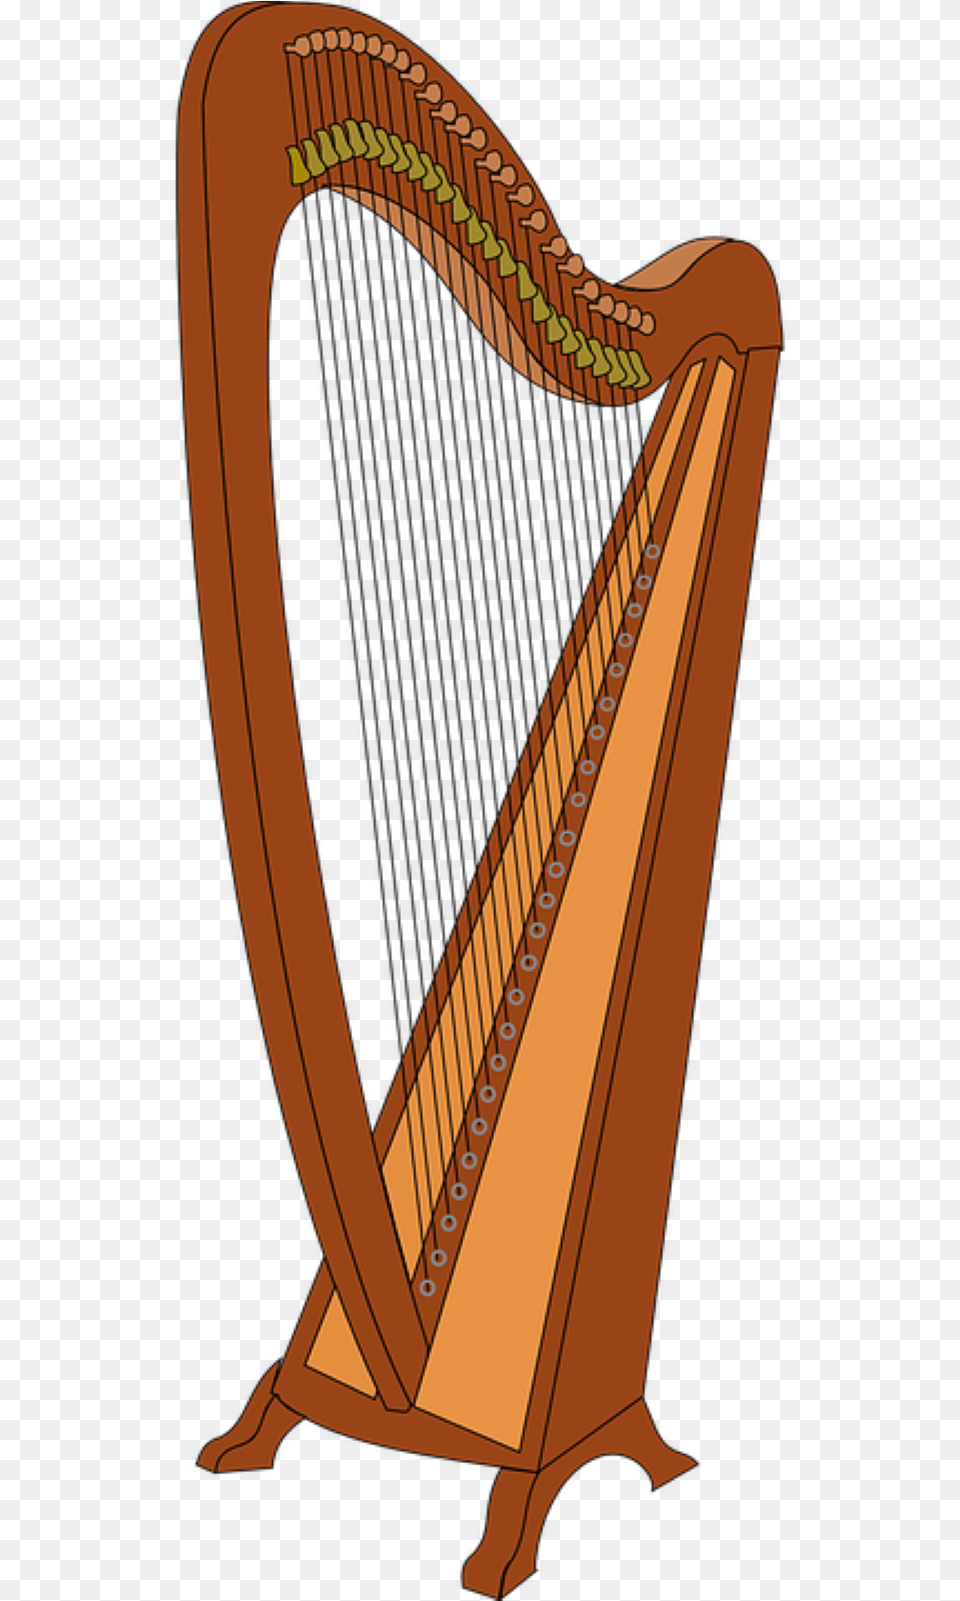 The Harp Arpa Instrumento Musical, Musical Instrument Png